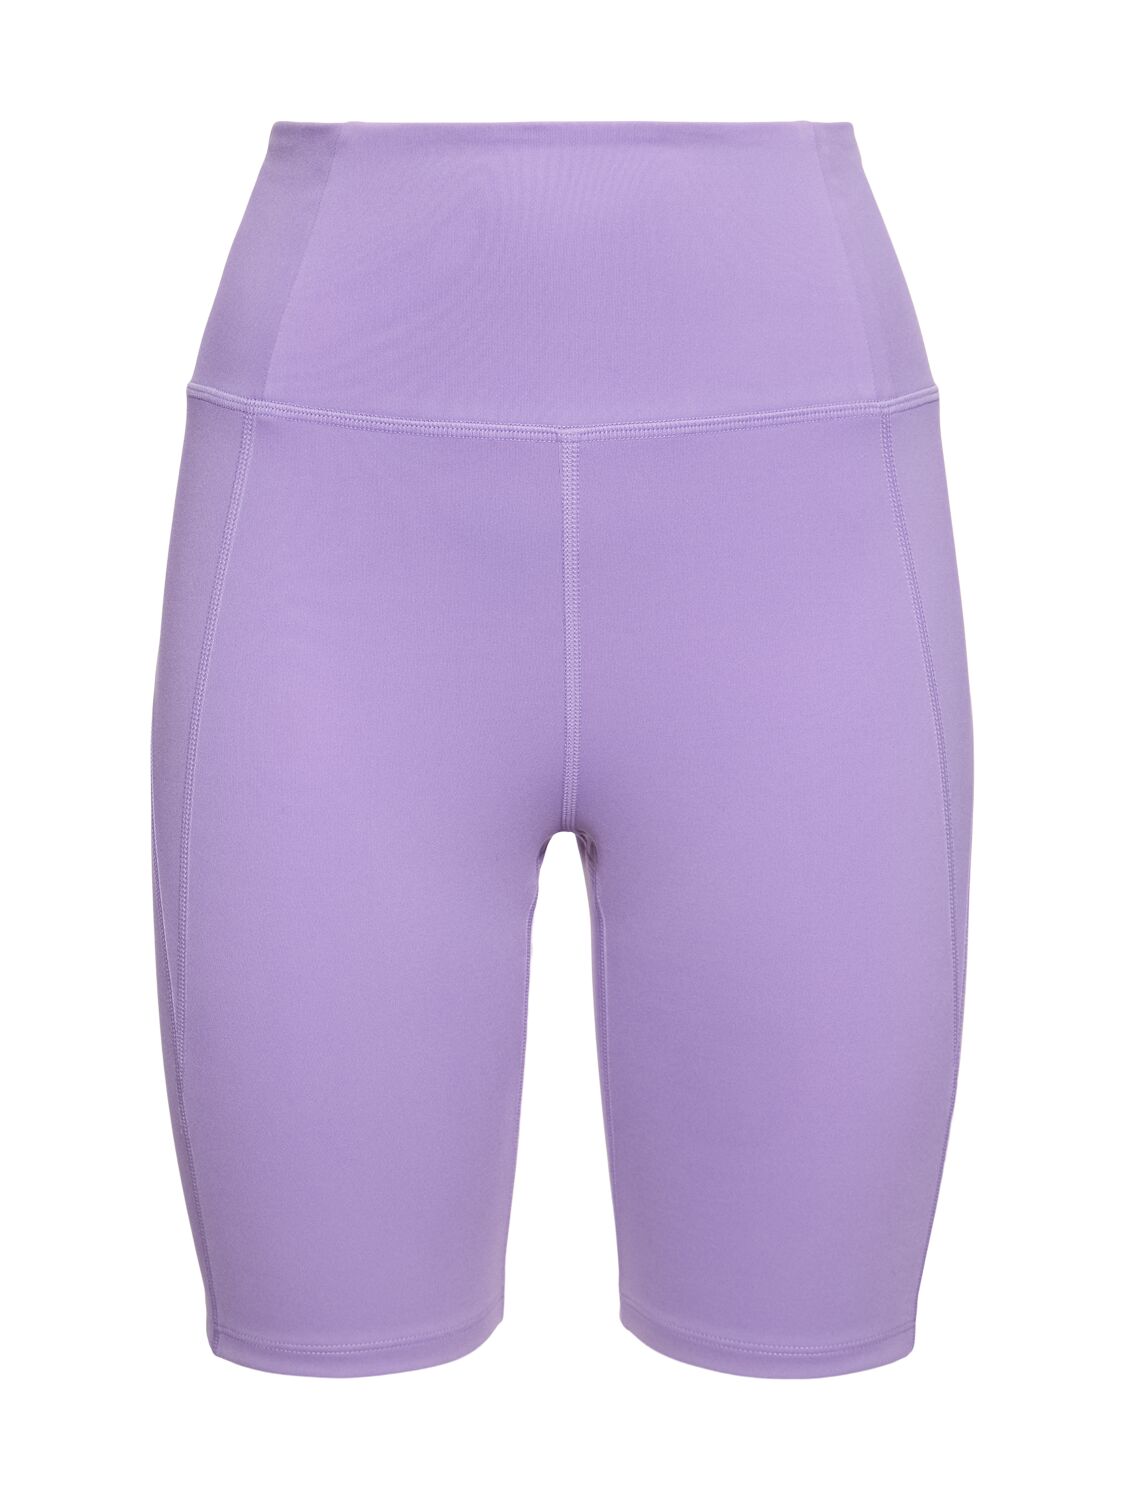 Girlfriend Collective High Rise Stretch Tech Running Shorts In Violet